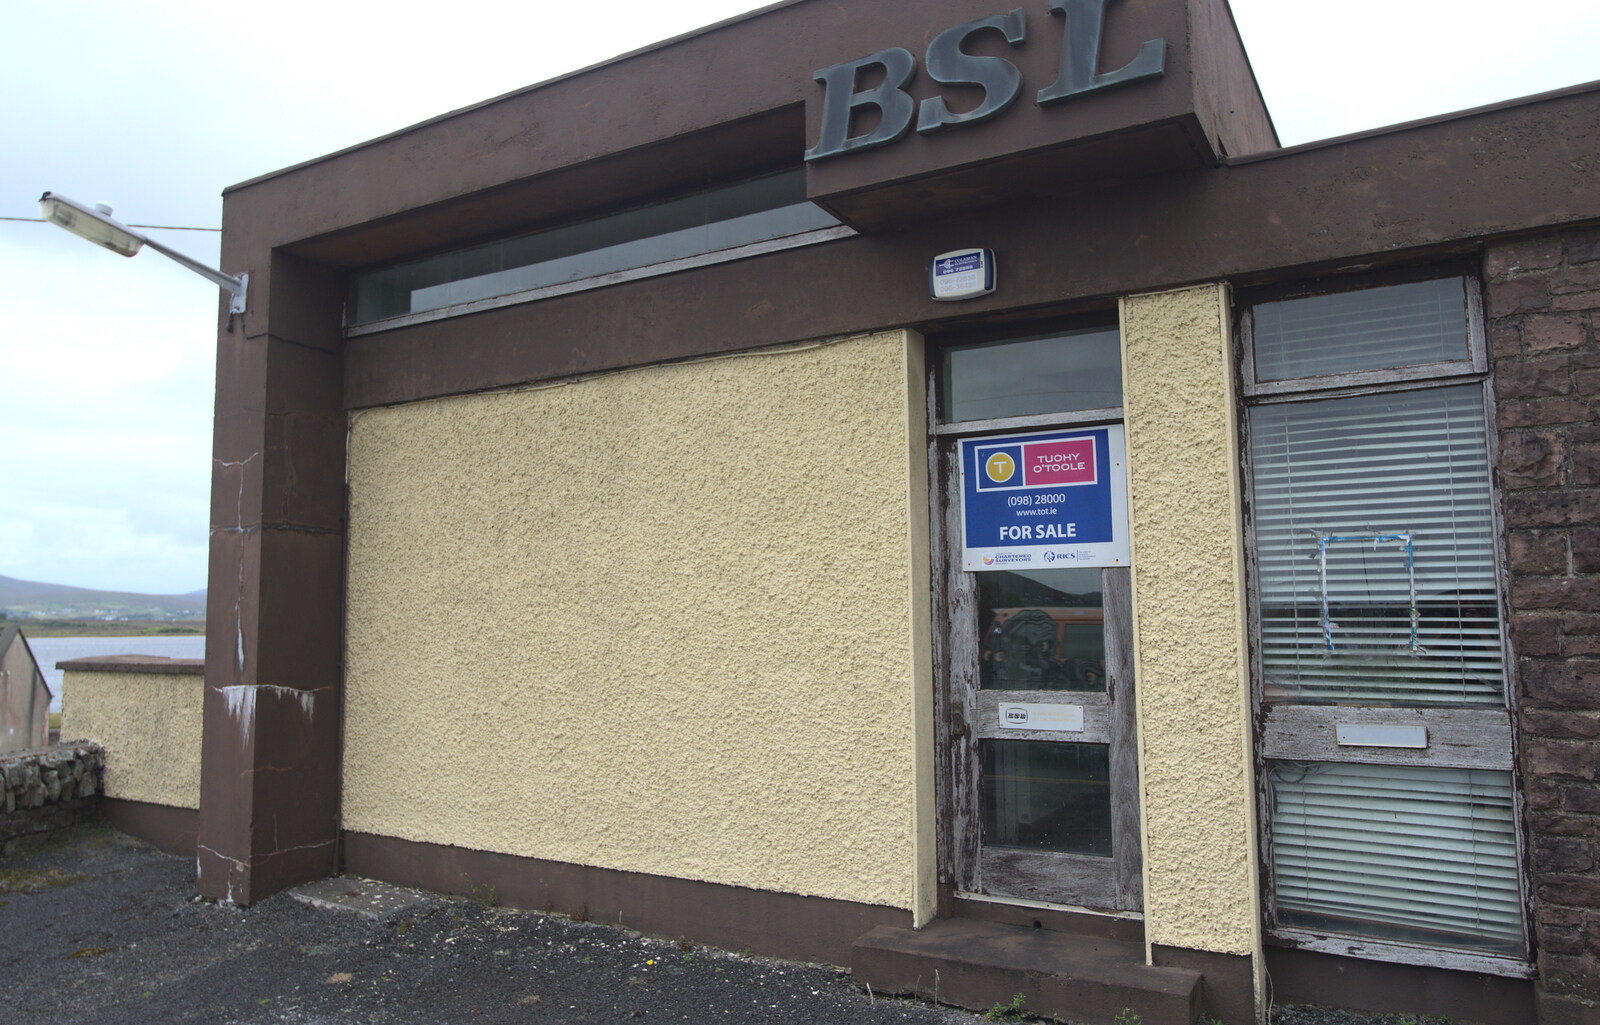 The empty 70s-style BSL office in Achill from From Achill to Strokestown, Mayo and Roscommon, Ireland - 10th August 2017